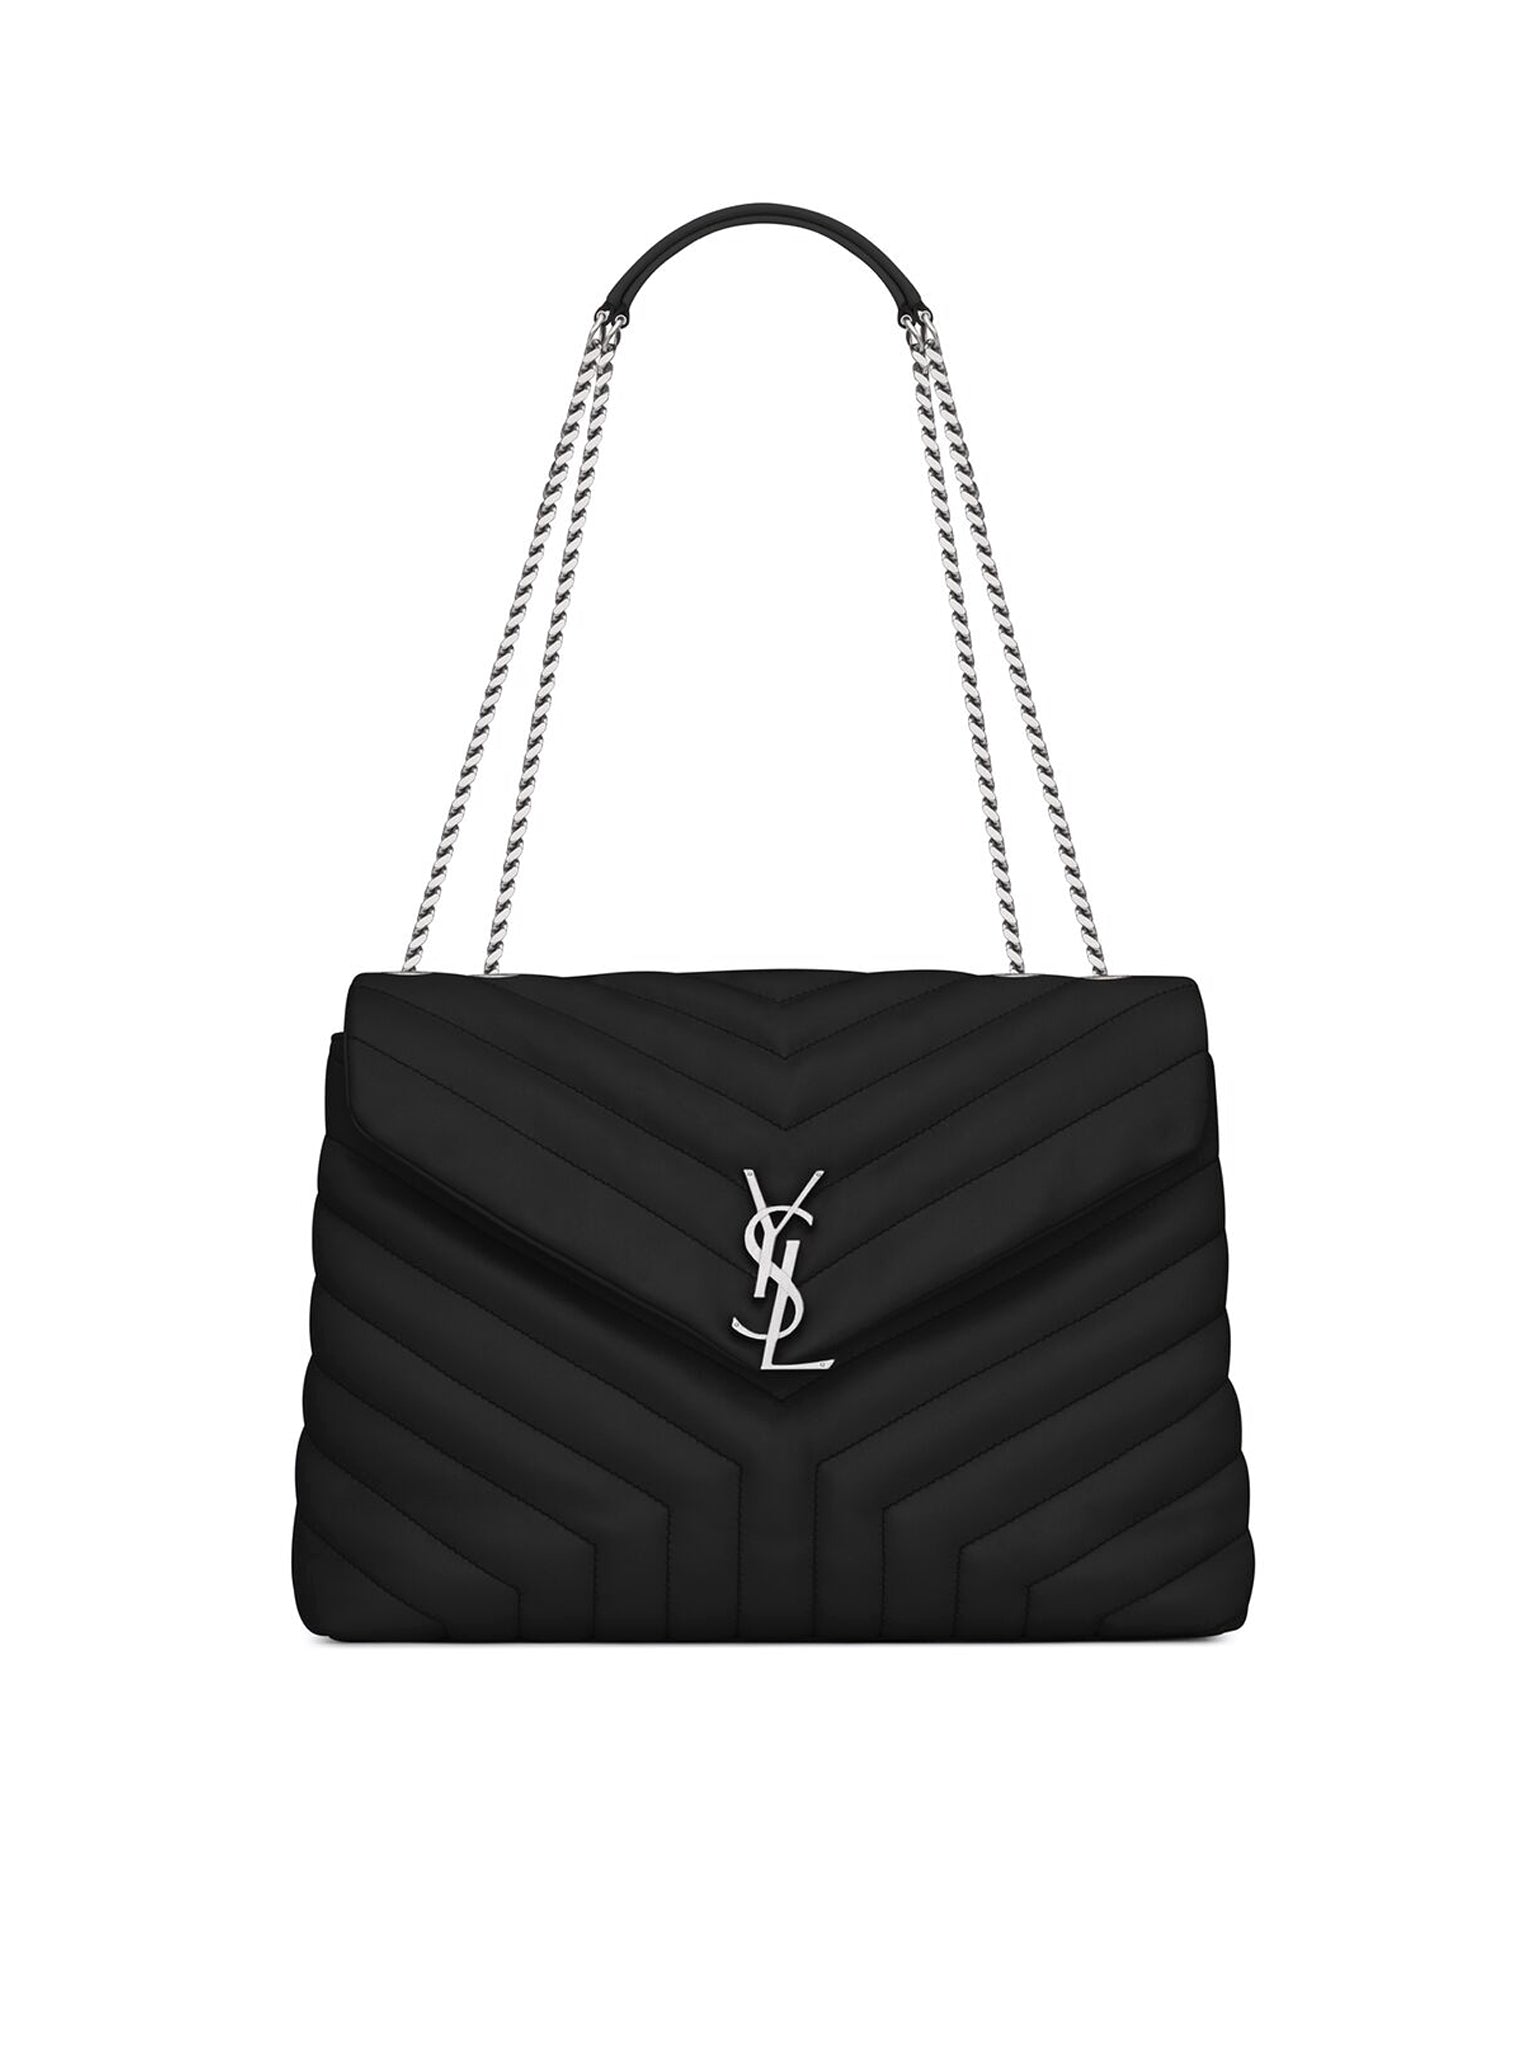 LOULOU MEDIUM "Y" QUILTED LEATHER BAG